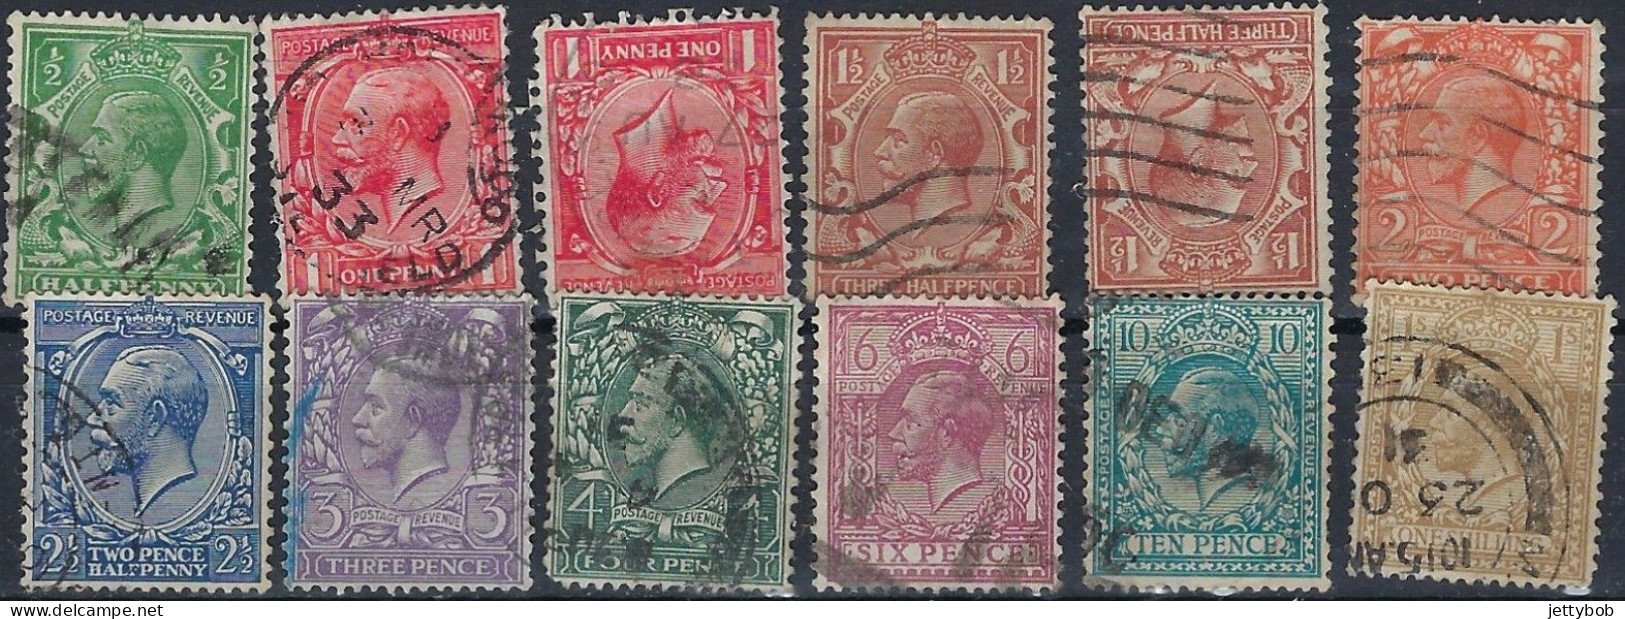 GB 1924 GV Definitives Wmk: Block Cypher 10 Values + 2 Inverted Watermarks Used - Used Stamps